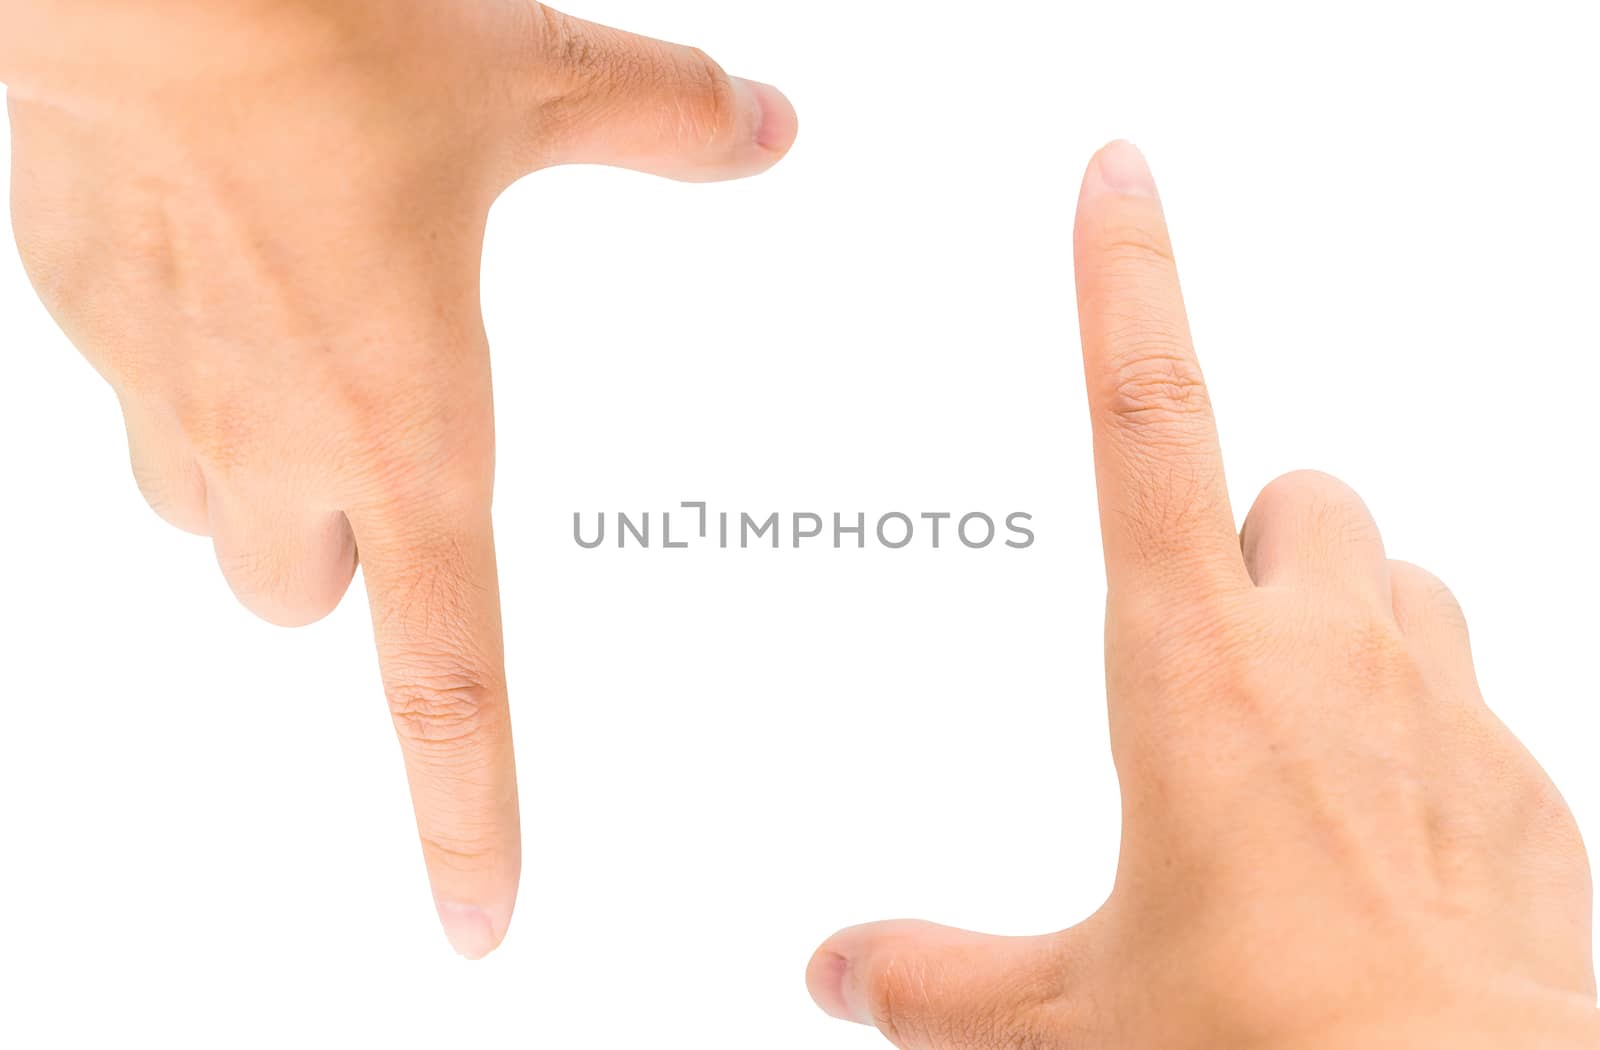 Man hand isolated on white background with clipping path